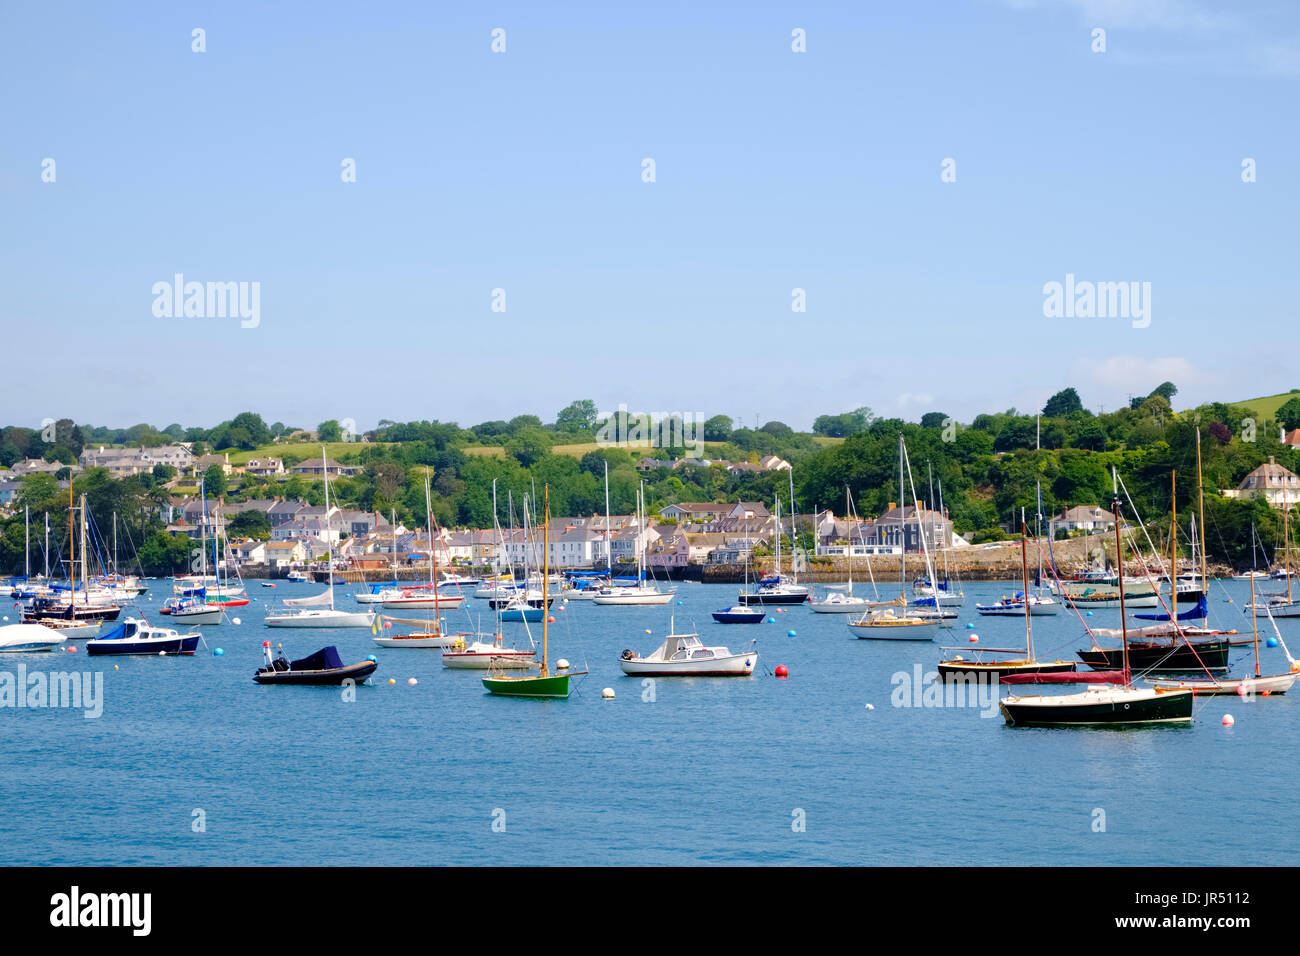 Sailing boats and yachts in Falmouth harbour, Falmouth, Cornwall, UK Stock Photo